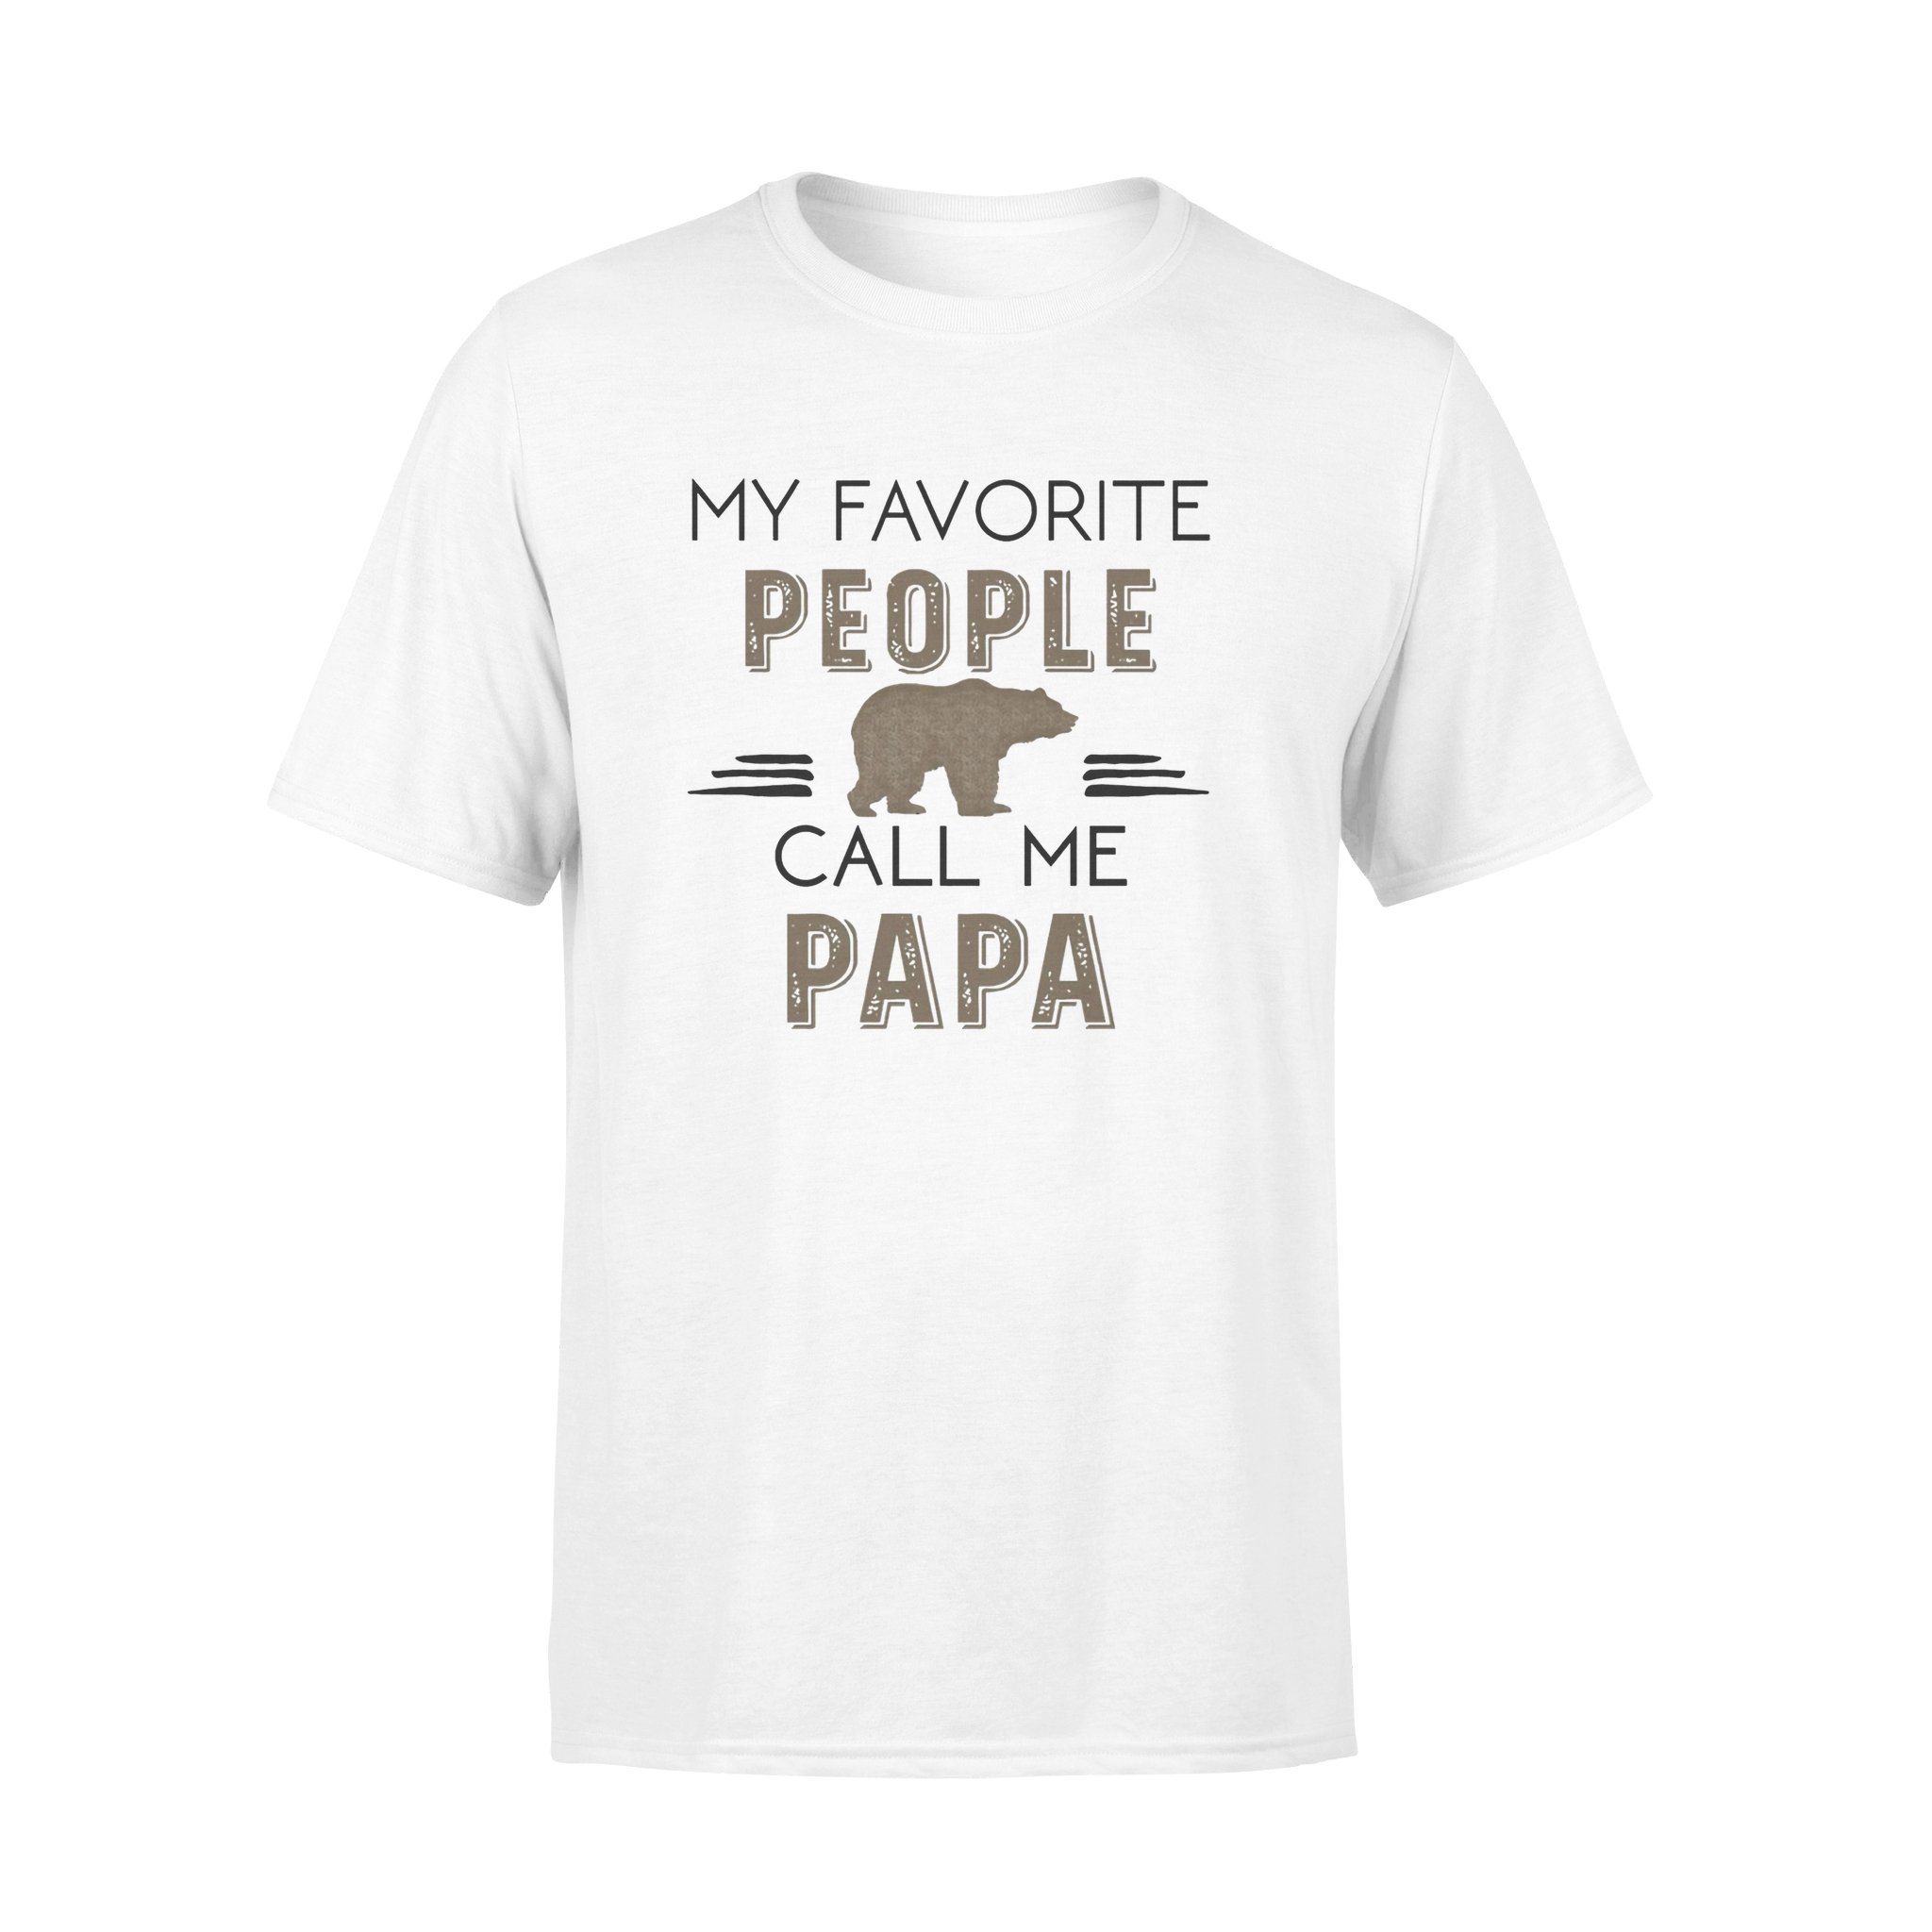 MY FAVORITE PEOPLE CALL ME PAPA, GIFTS FOR GRANDPA,GRANDPA SHIRT,GRANDPA GIFTS,FATHER?S DAY GIFT,PLUS SIZE SHIRT